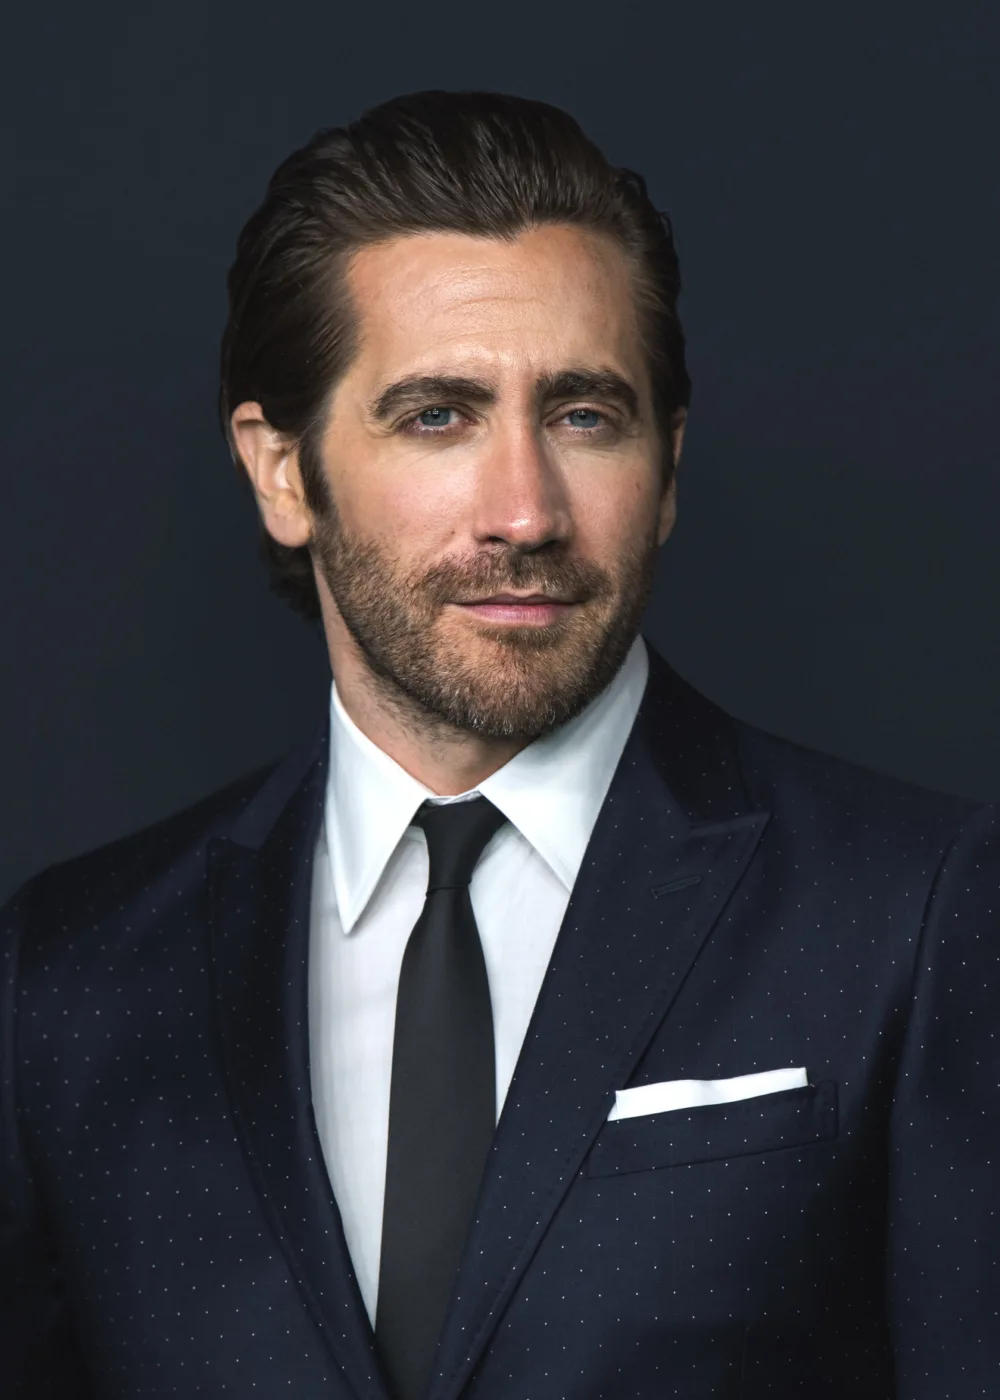 Jake Gyllenhaal is an American actor known for his dynamic range and intense performances. Born on December 19, 1980, in Los Angeles, California, Gyllenhaal grew up in a show business family and began acting in his early teens. He gained early recognition for his work in the cult classic Donnie Darko and has since gone on to star in a diverse array of films, from indie dramas like Brokeback Mountain and Nightcrawler to big-budget blockbusters like Spider-Man: Far From Home. Gyllenhaal is known for his transformative performances and his dedication to his craft. He has received numerous accolades for his work, including a Golden Globe Award and a BAFTA Award, and has been nominated for an Academy Award. In addition to his film work, Gyllenhaal has also worked in theater, receiving critical acclaim for his performances in Broadway productions of Constellations and Sunday in the Park with George. Gyllenhaal is also known for his philanthropic work, supporting various causes such as education, the environment, and LGBTQ rights. With his impressive talent and dedication to his craft, Gyllenhaal has become one of the most respected and sought-after actors of his generation.